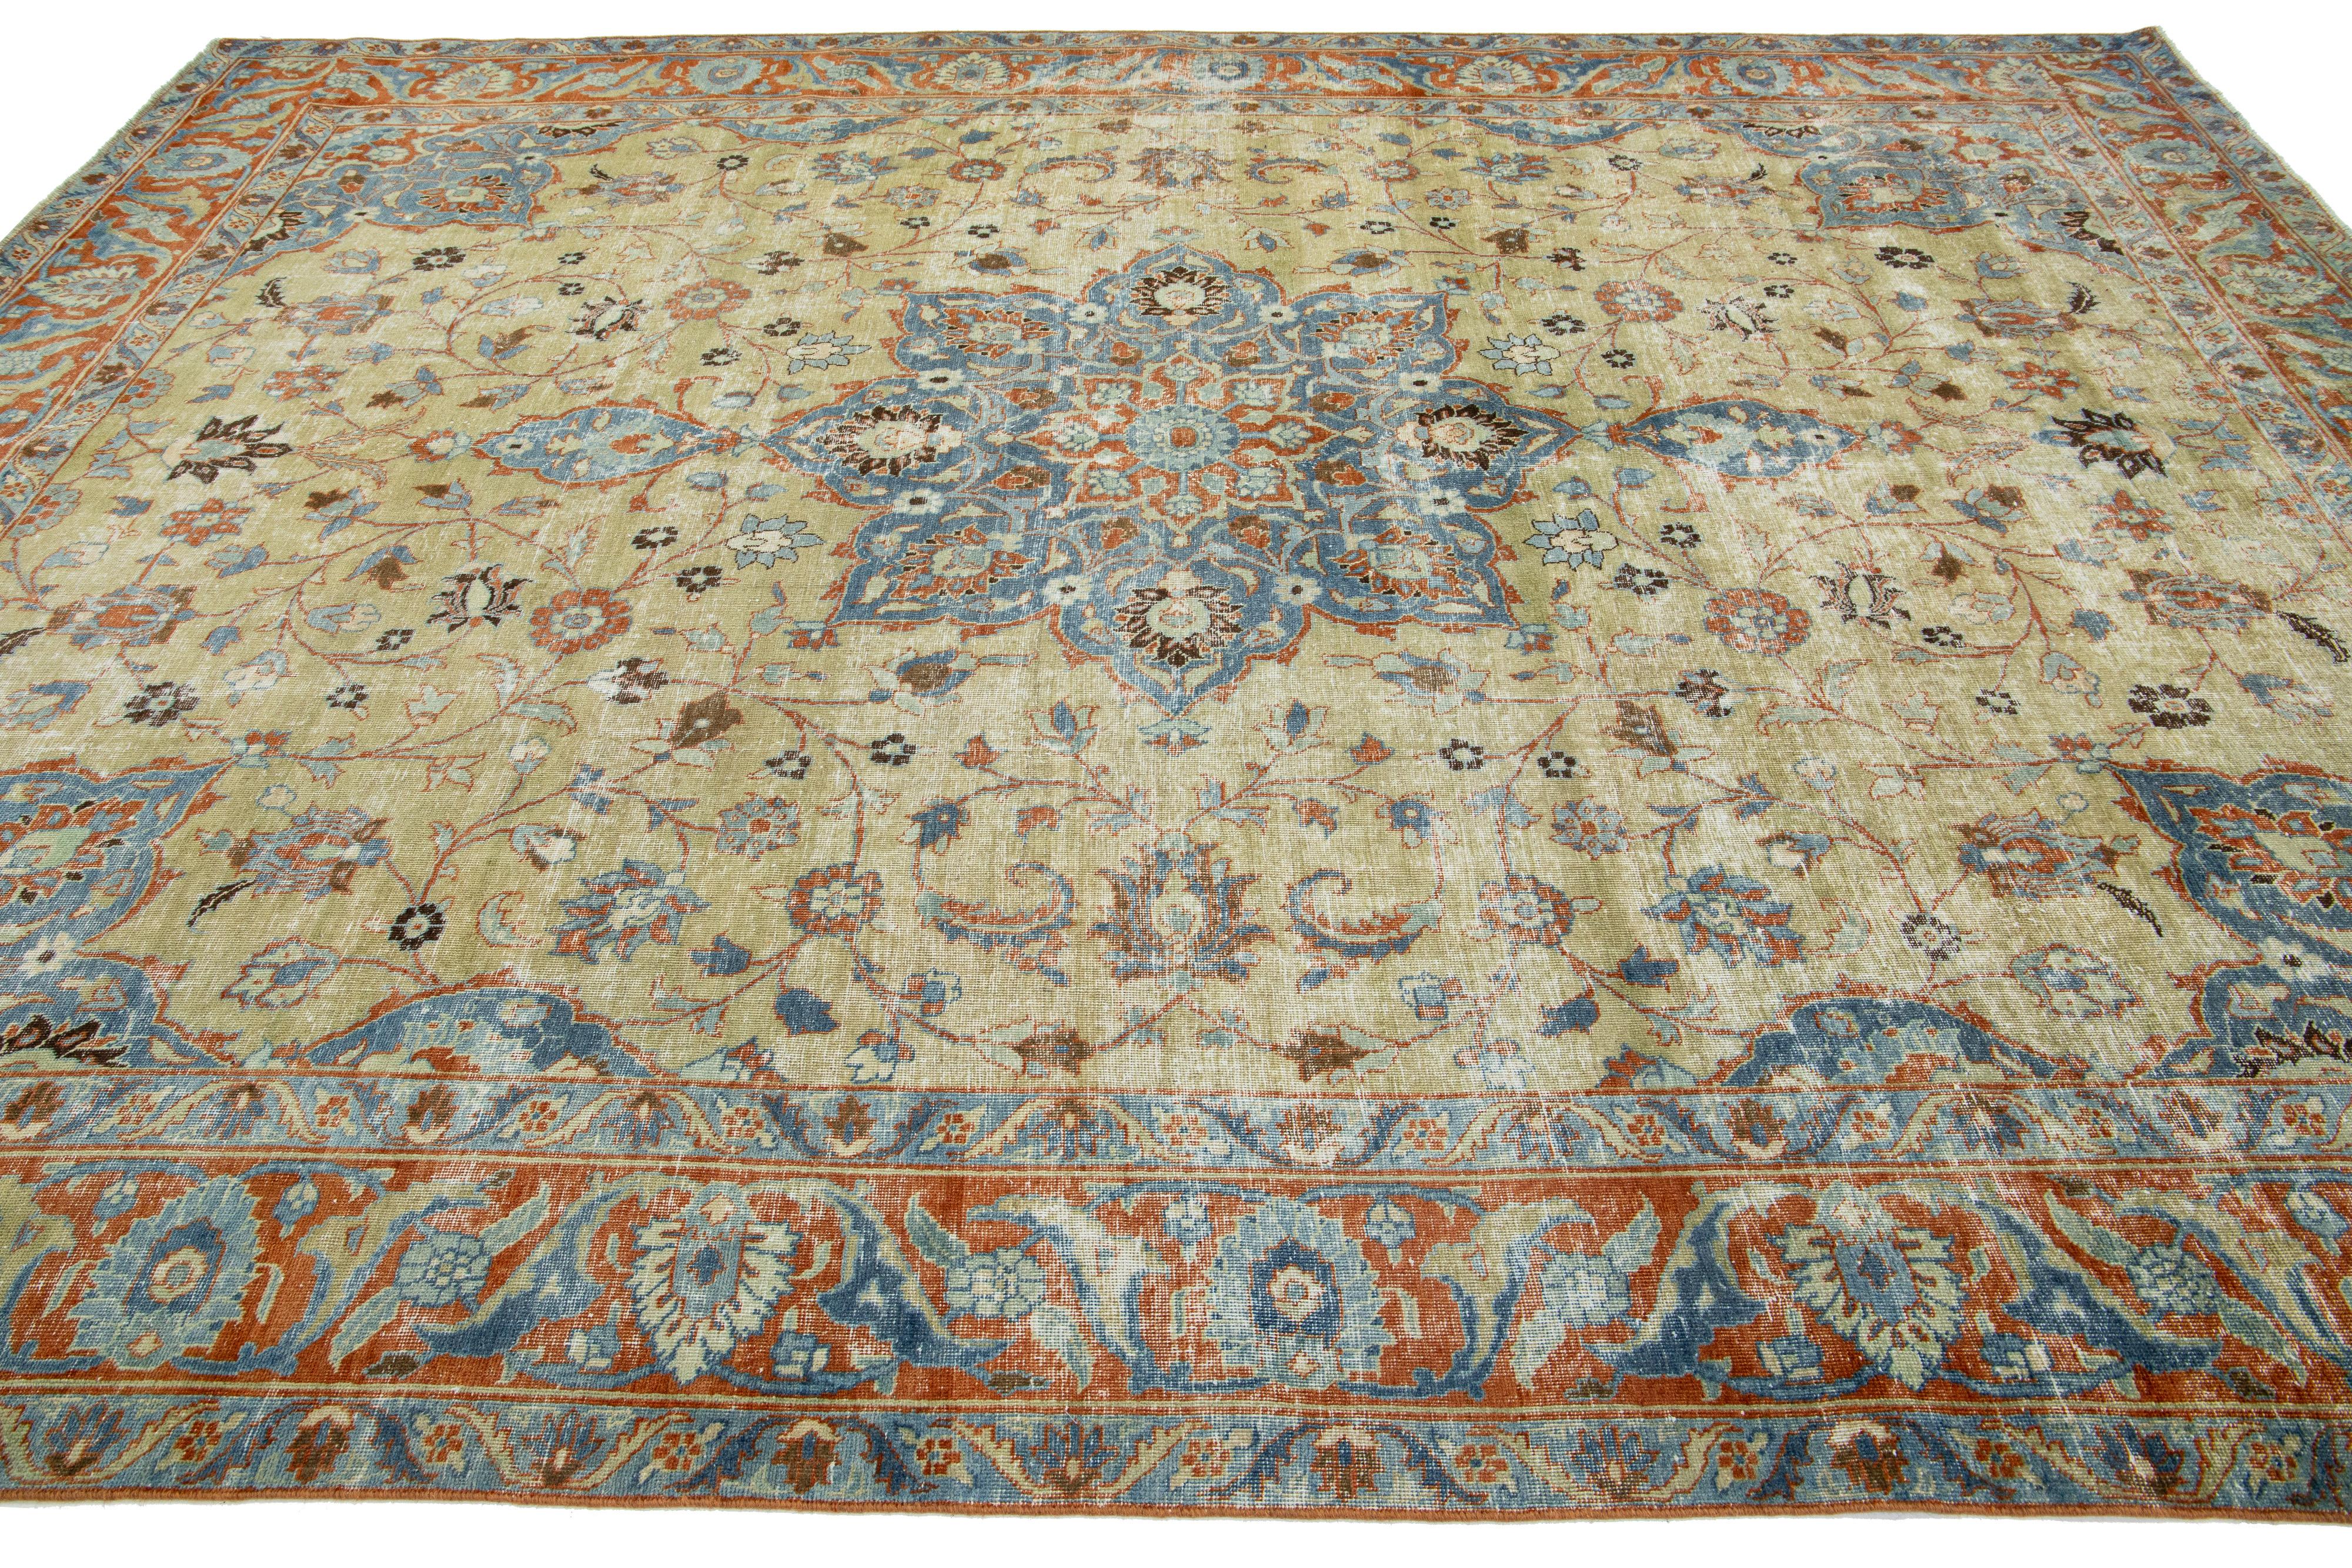 Medallion Designed Antique Wool Rug Persian Tabriz From 1900s In Excellent Condition For Sale In Norwalk, CT